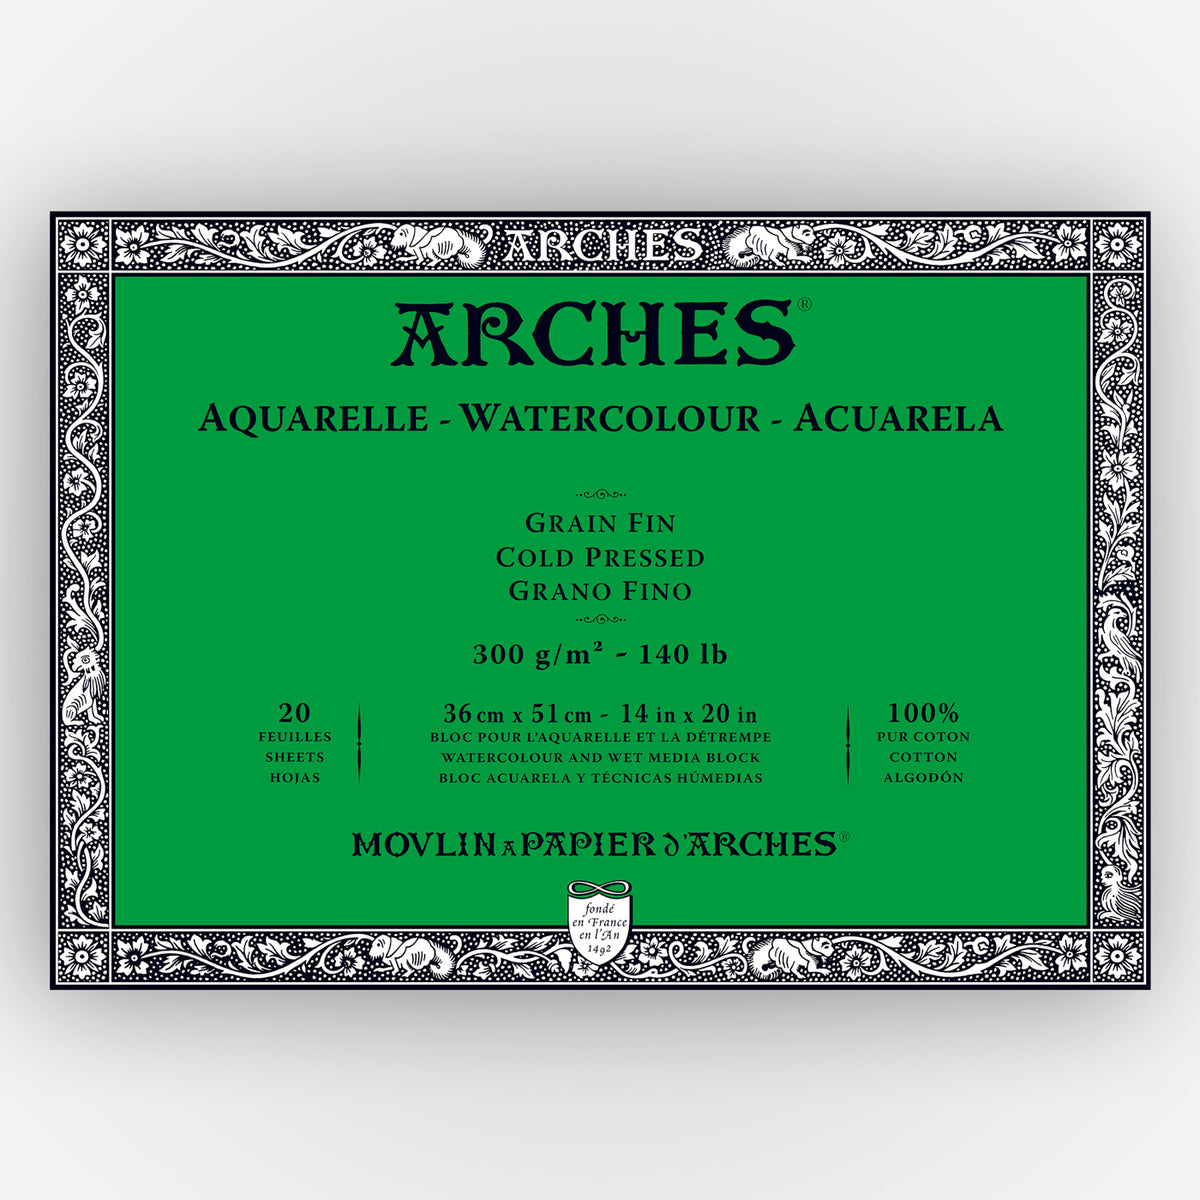 Arches Cold Pressed 300g 36x51cm 20 sheets